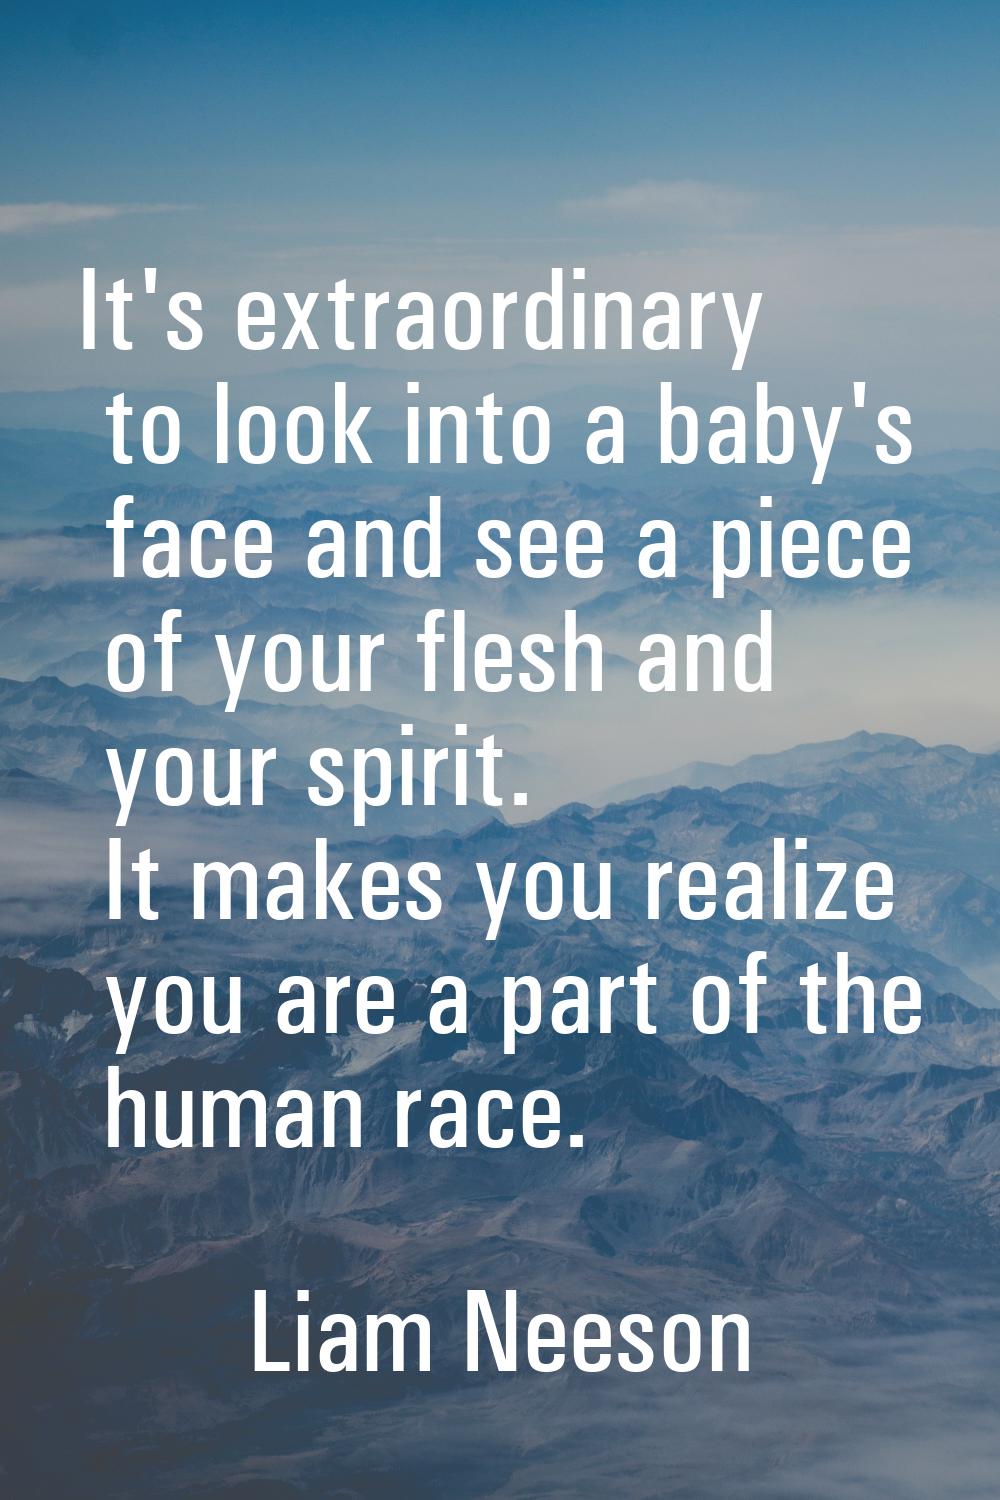 It's extraordinary to look into a baby's face and see a piece of your flesh and your spirit. It mak